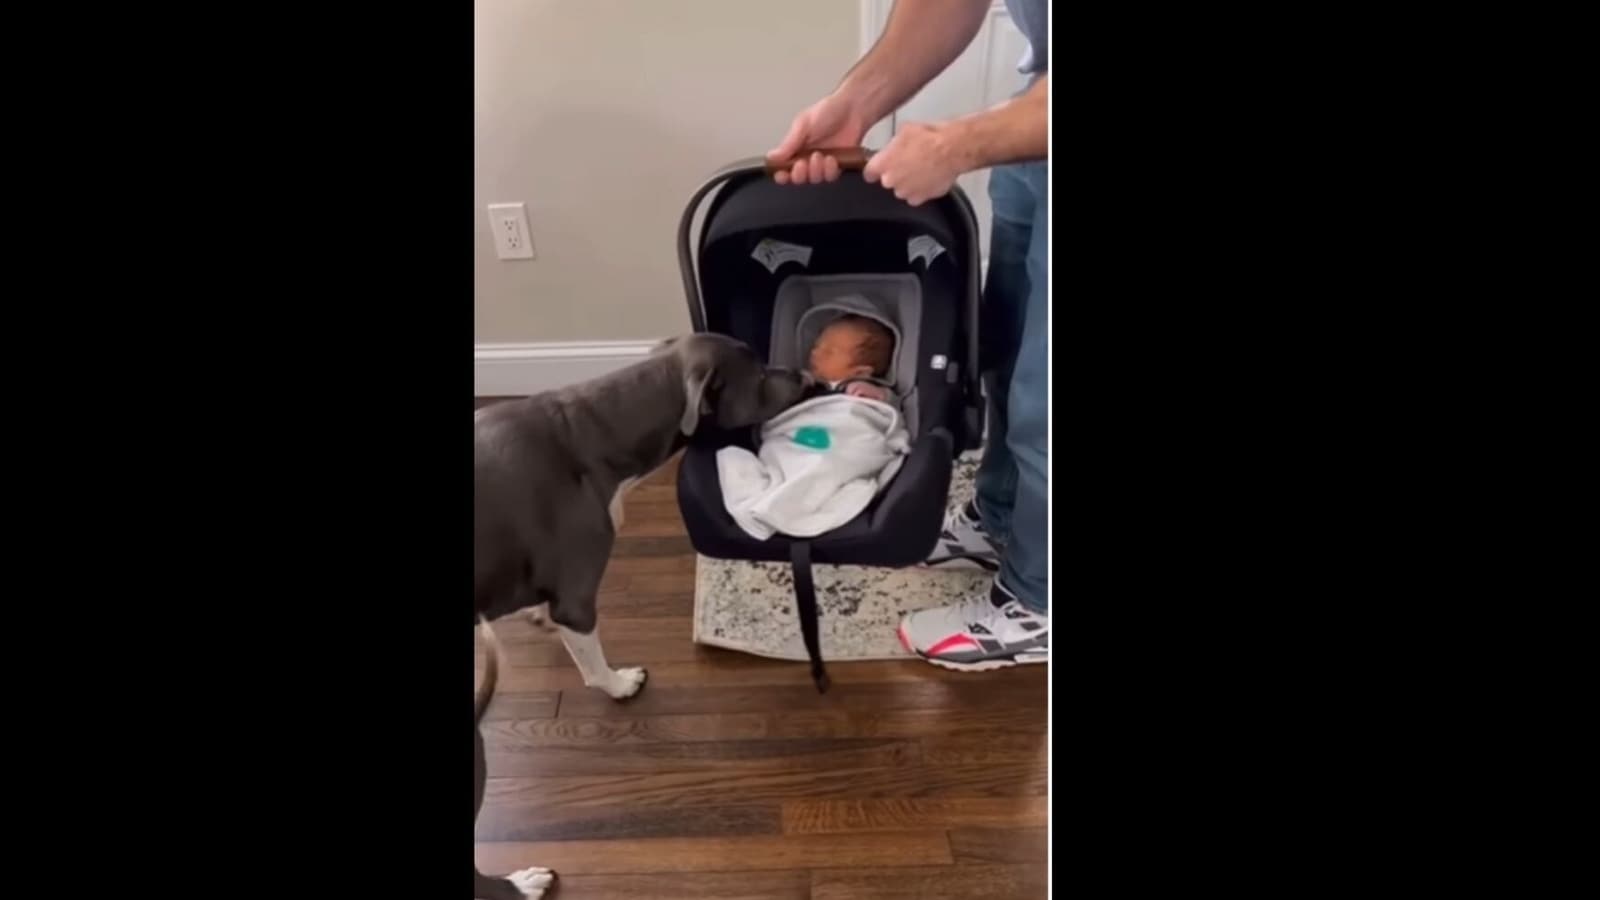 Dog meets its human’s baby for the first time and its reaction is heart-melting | Trending